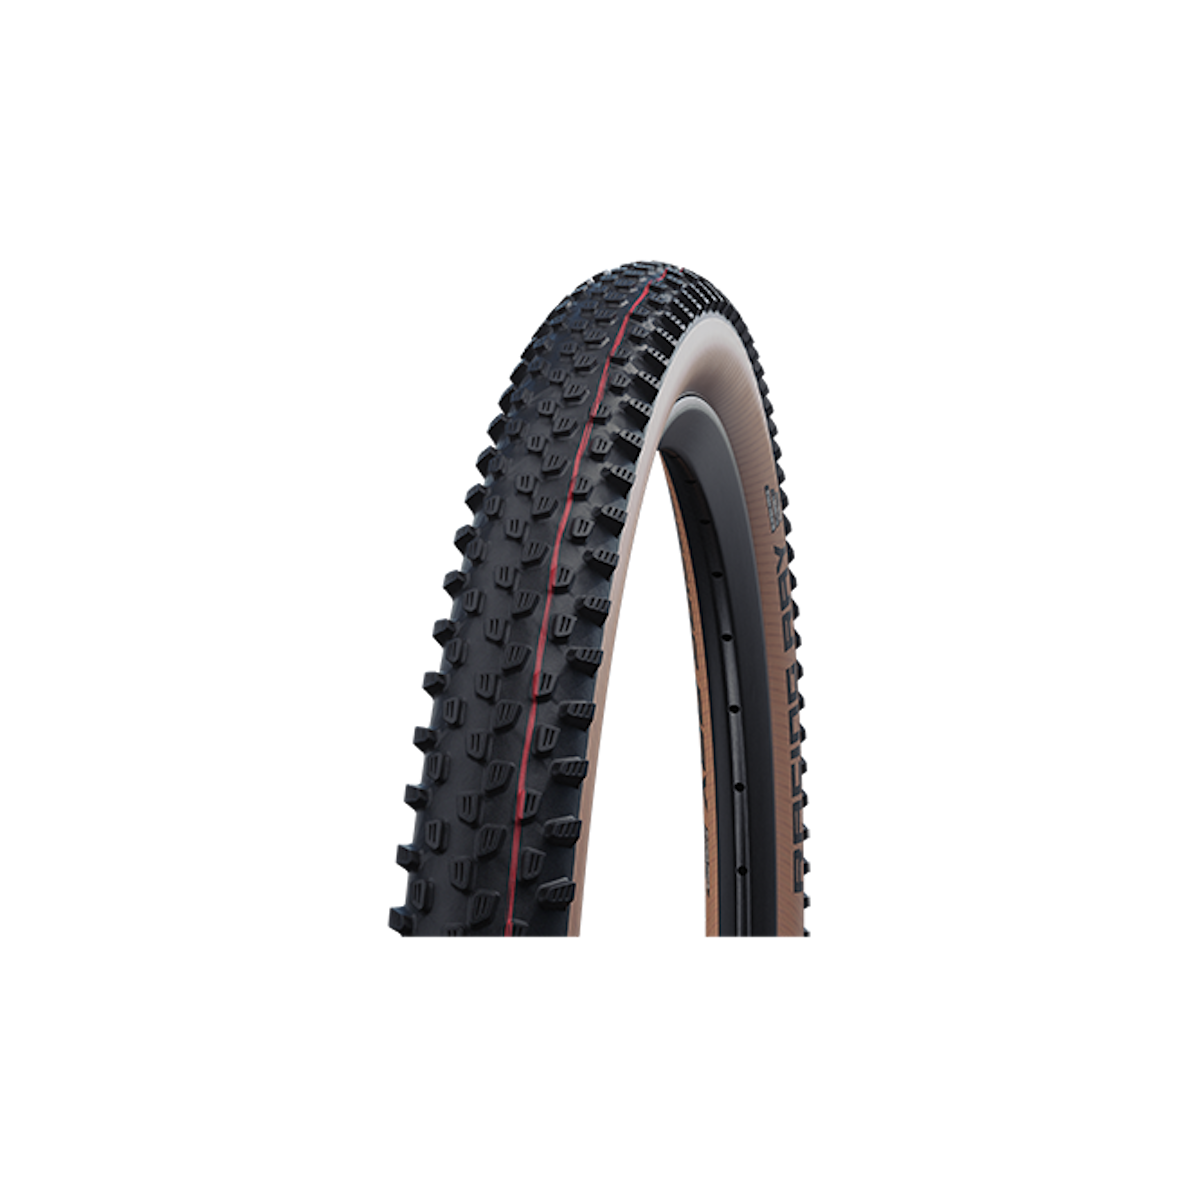 SCHWALBE RACING RAY EVOLUTION SUPER RACE 29 X 2.35 tubeless tyre